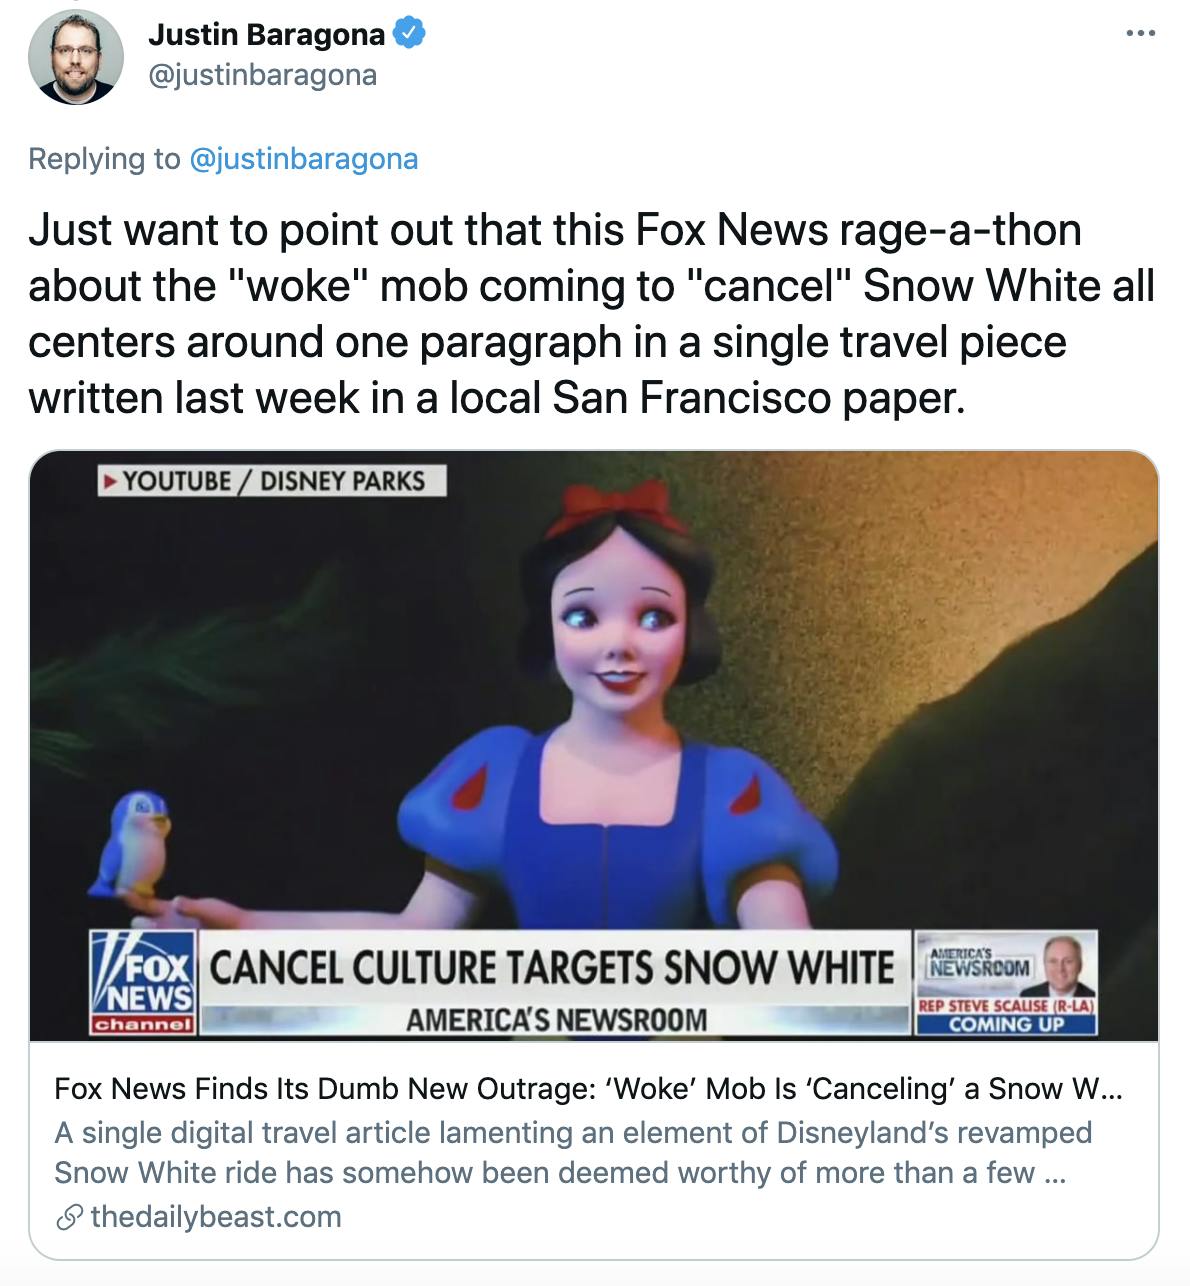 Just want to point out that this Fox News rage-a-thon about the 'woke' mob coming to 'cancel' Snow White all centers around one paragraph in a single travel piece written last week in a local San Francisco paper.